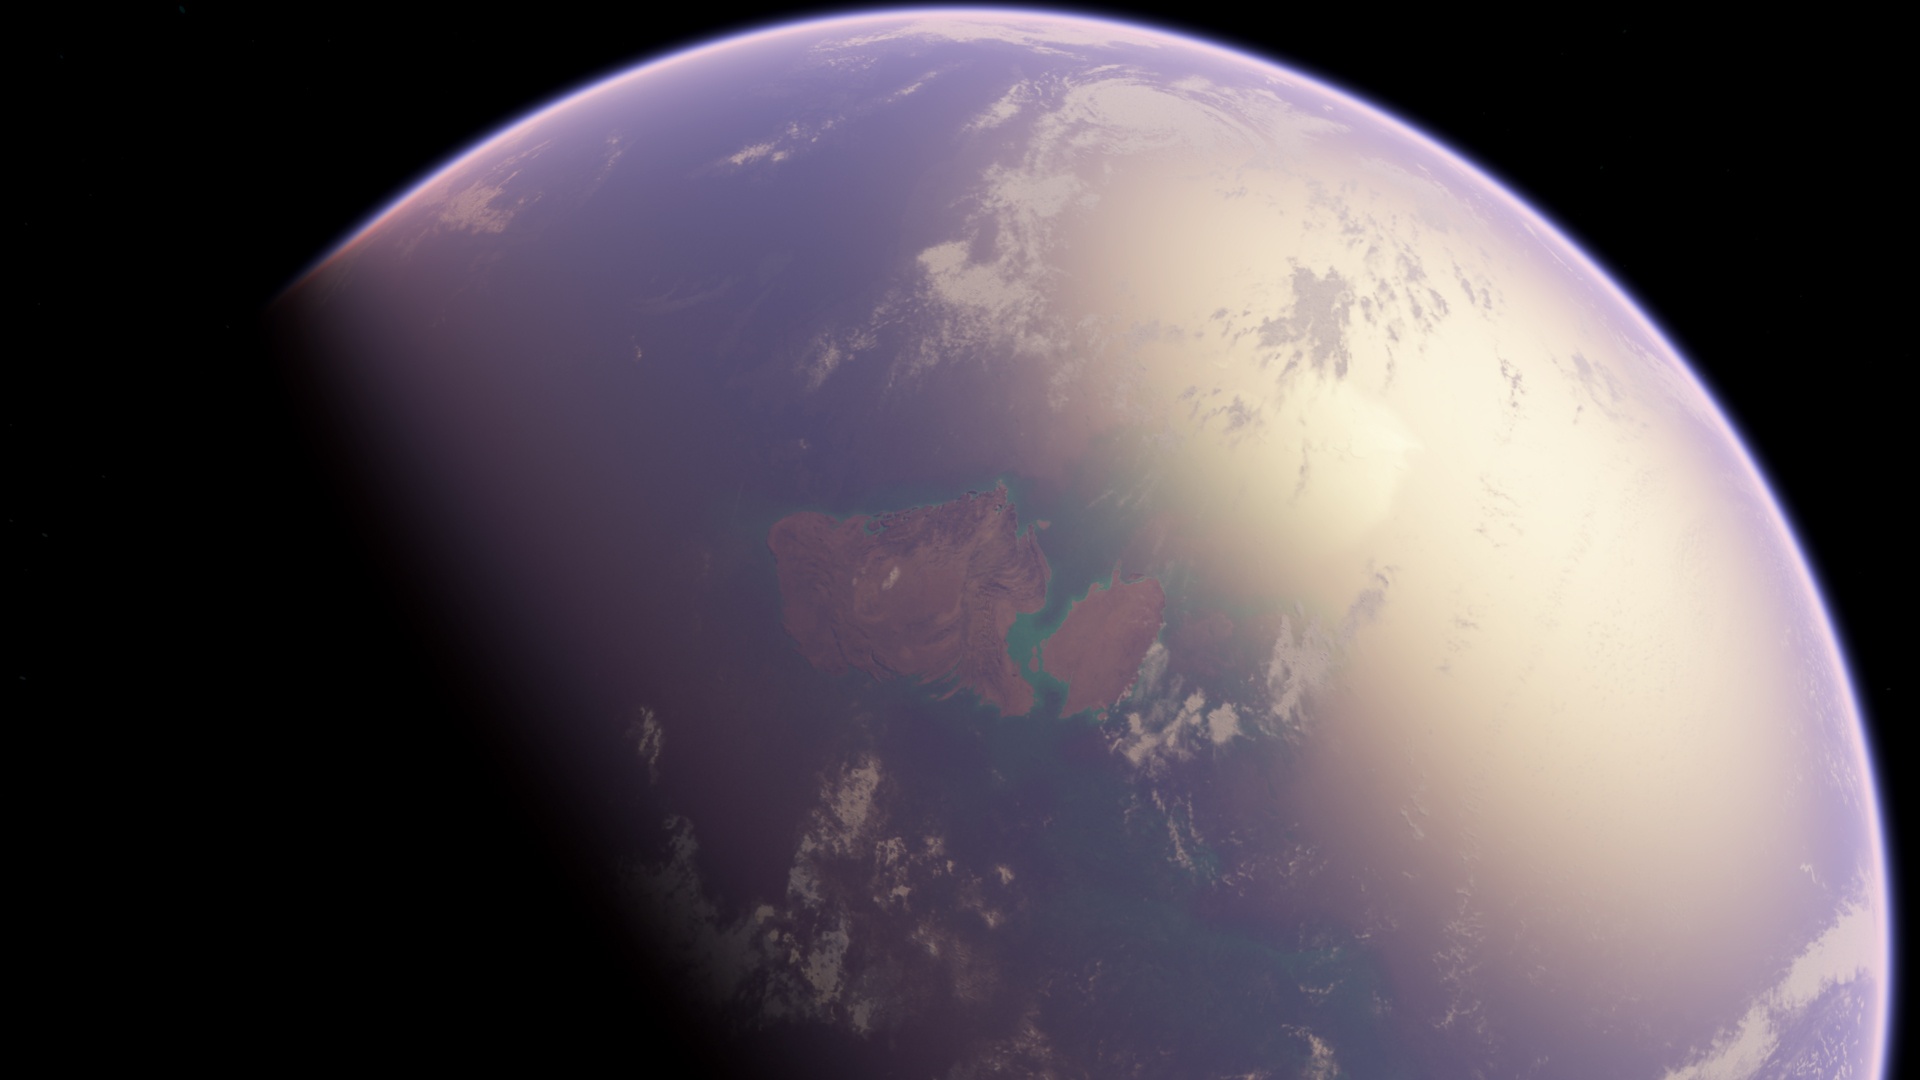 Artist's impression of Earth in the early Archean with a purplish hydrosphere and coastal regions. Even in this early period, life flourished and was gaining complexity. Credit: Oleg Kuznetsov